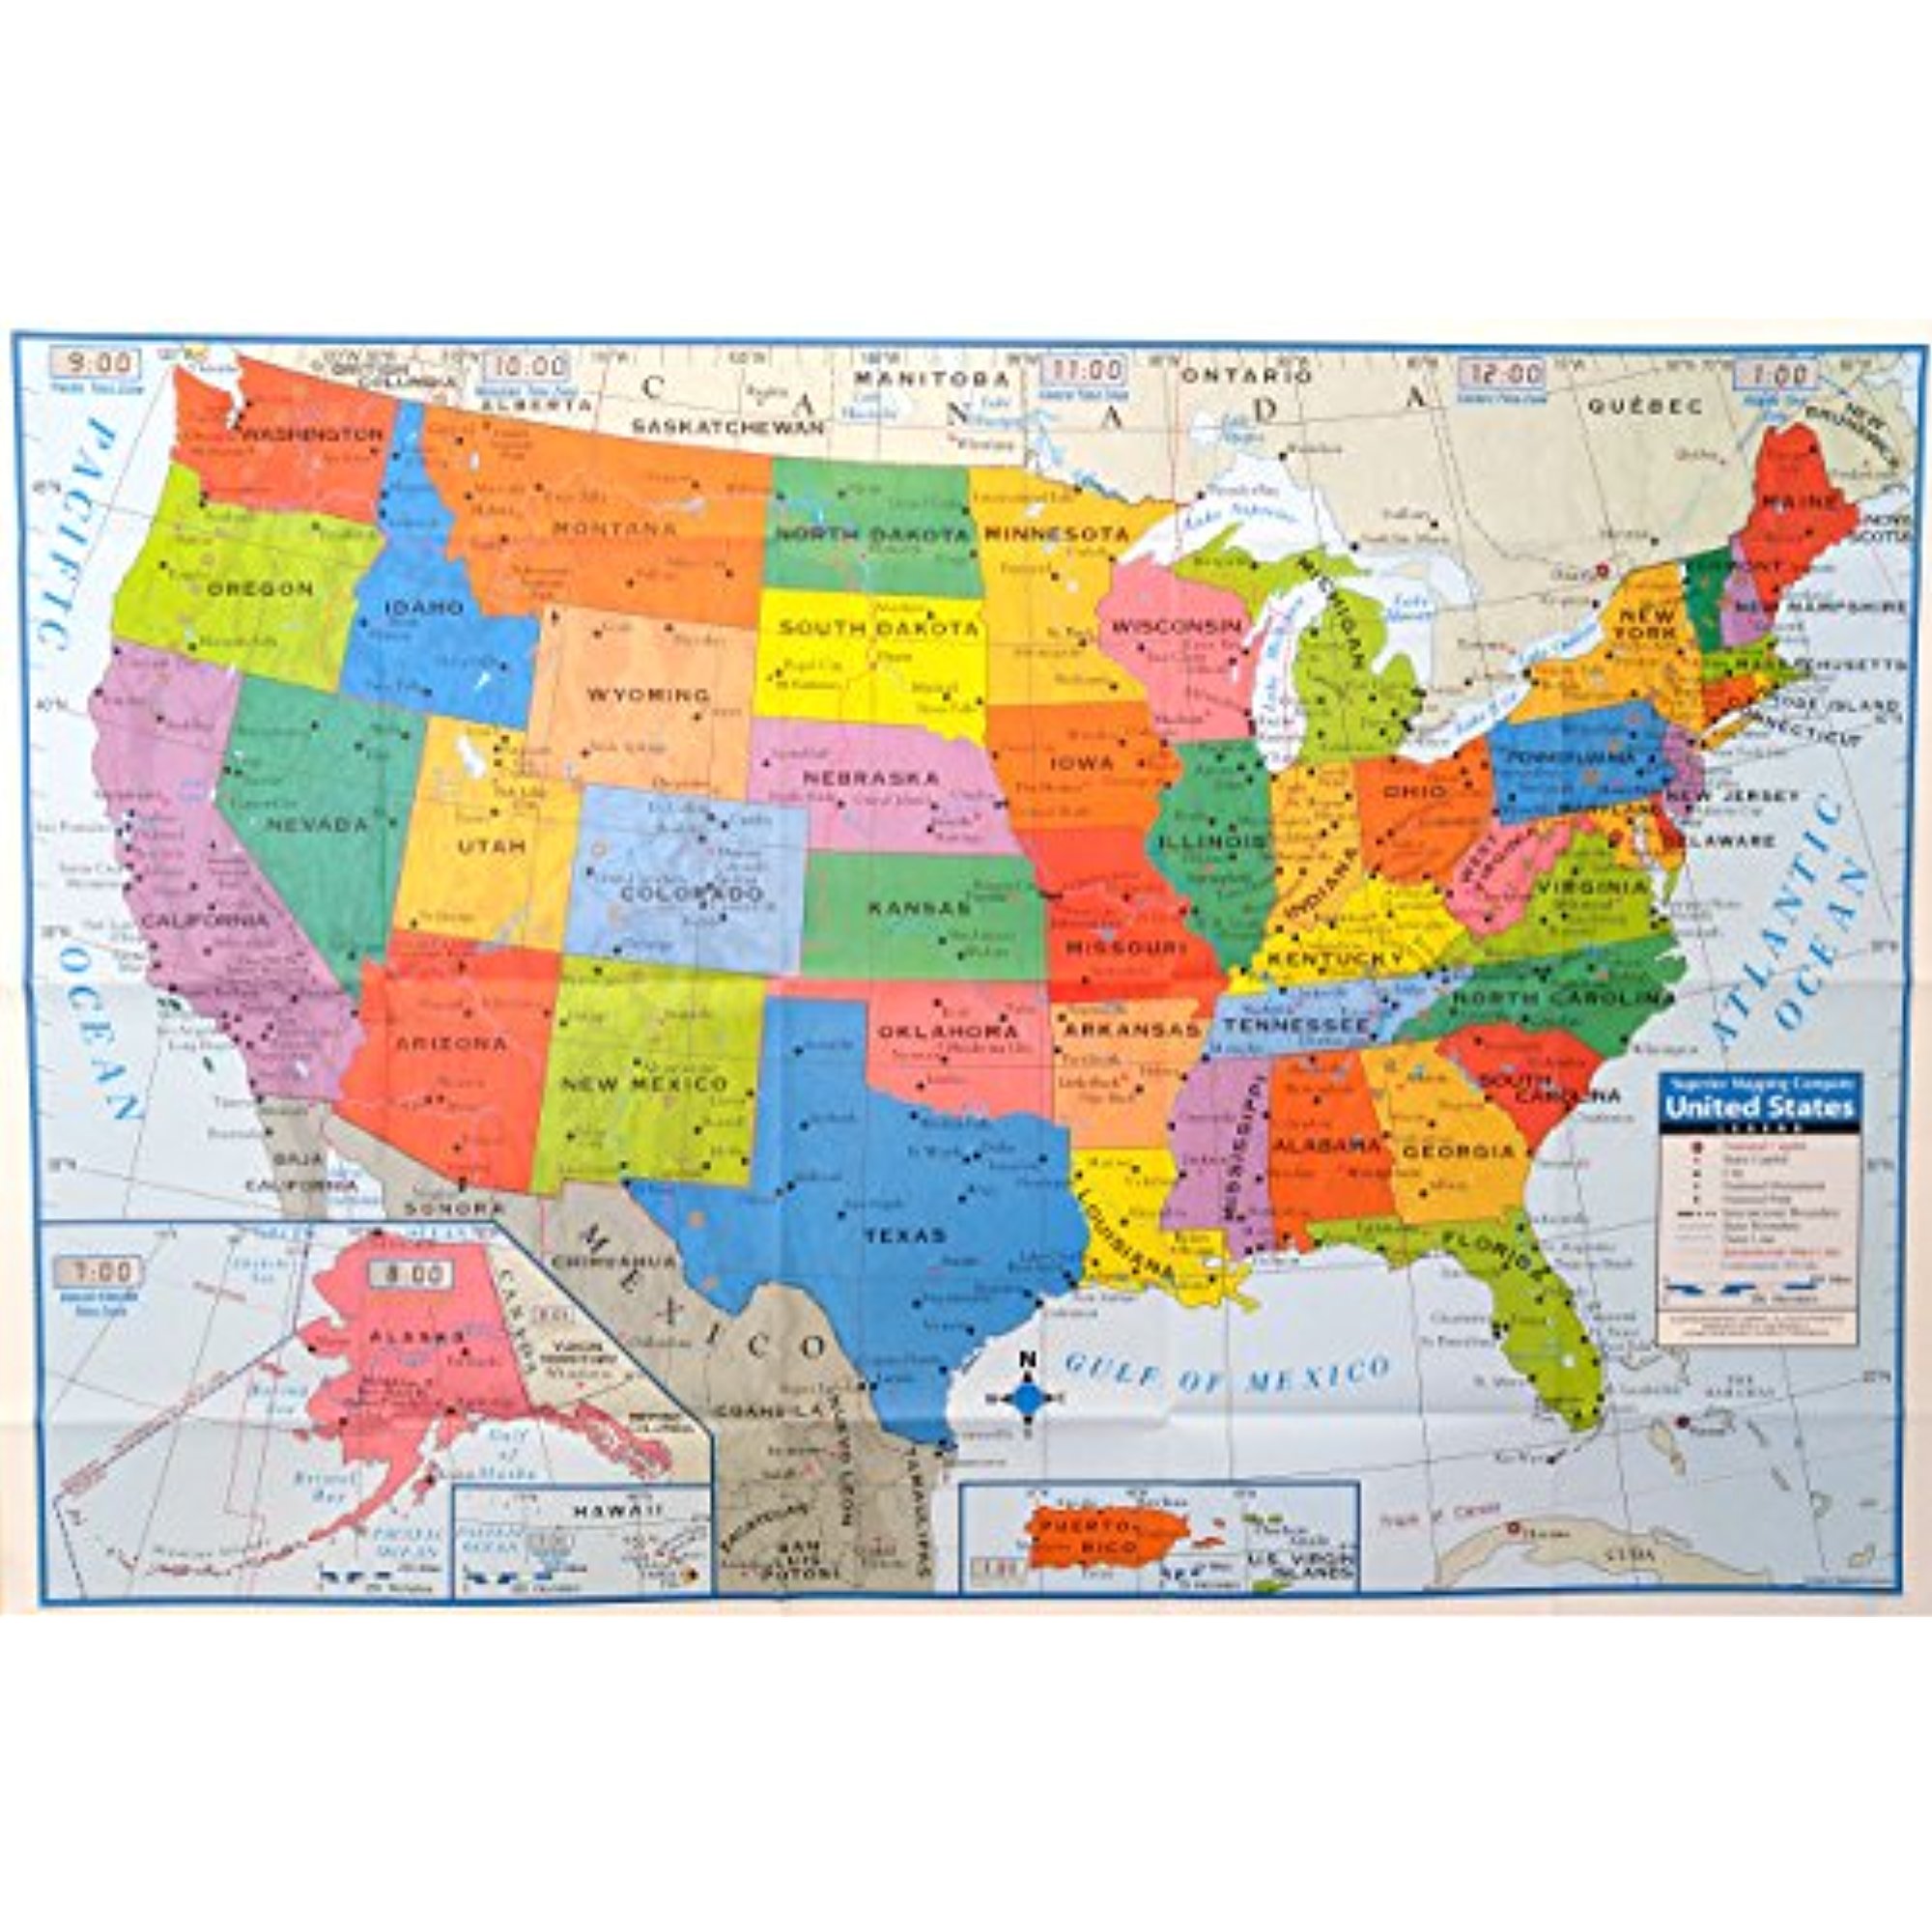 Superior Mapping Company United States Poster Size Wall Map 40" x 28" With Cities (1 Map) - image 1 of 5